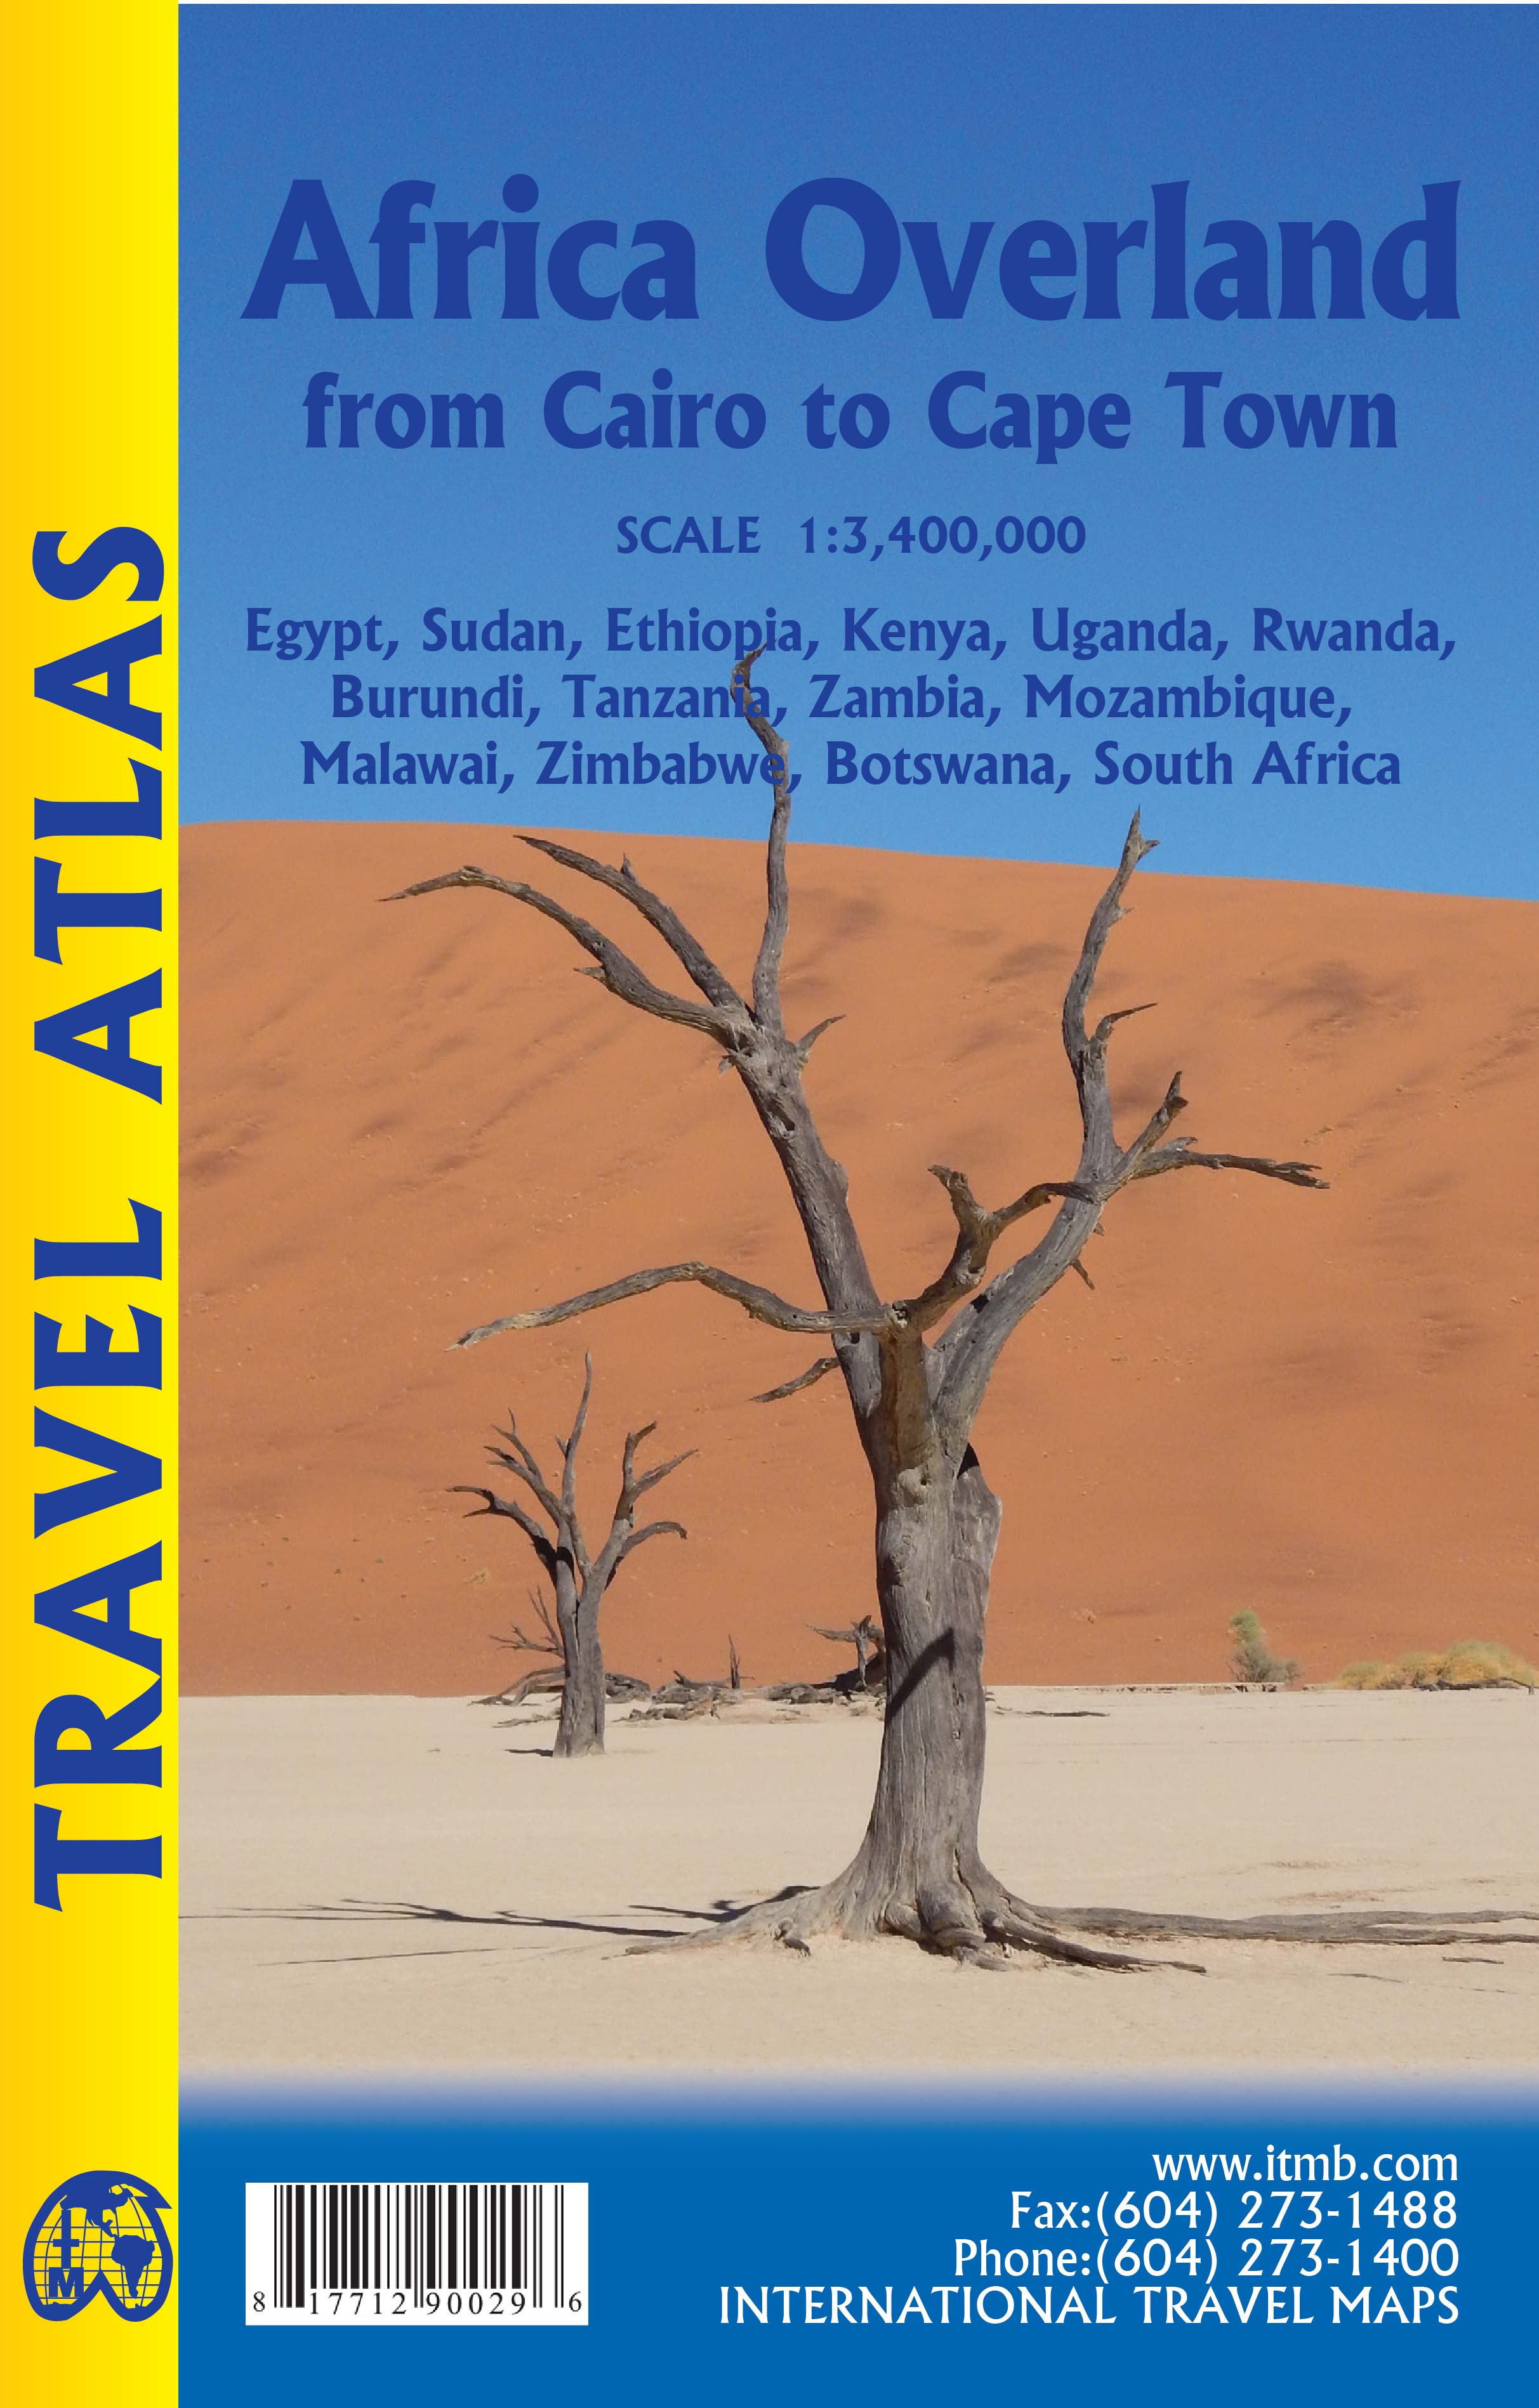 1. Africa Overland Travel Atlas: Cairo to Cape Town 1:3.4M-2016